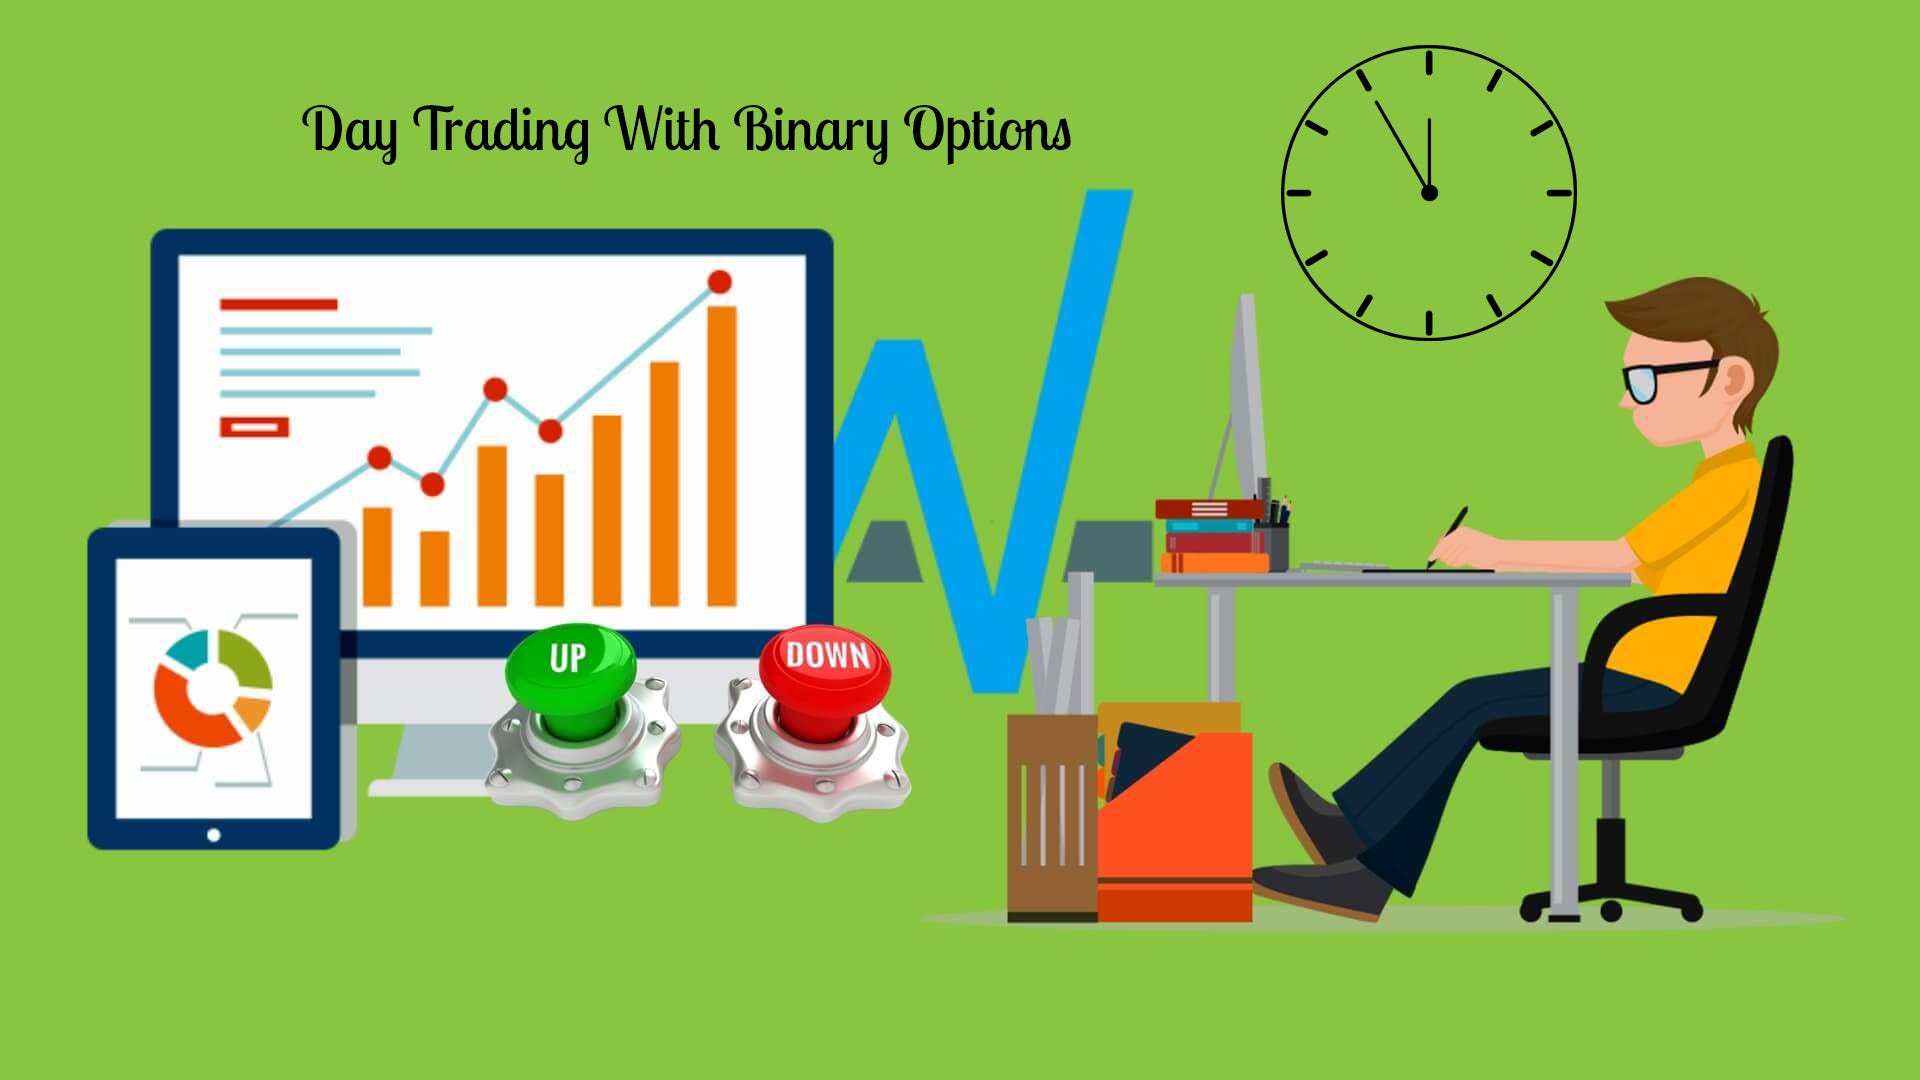 Trading Binary Options Successfully Starts With Education